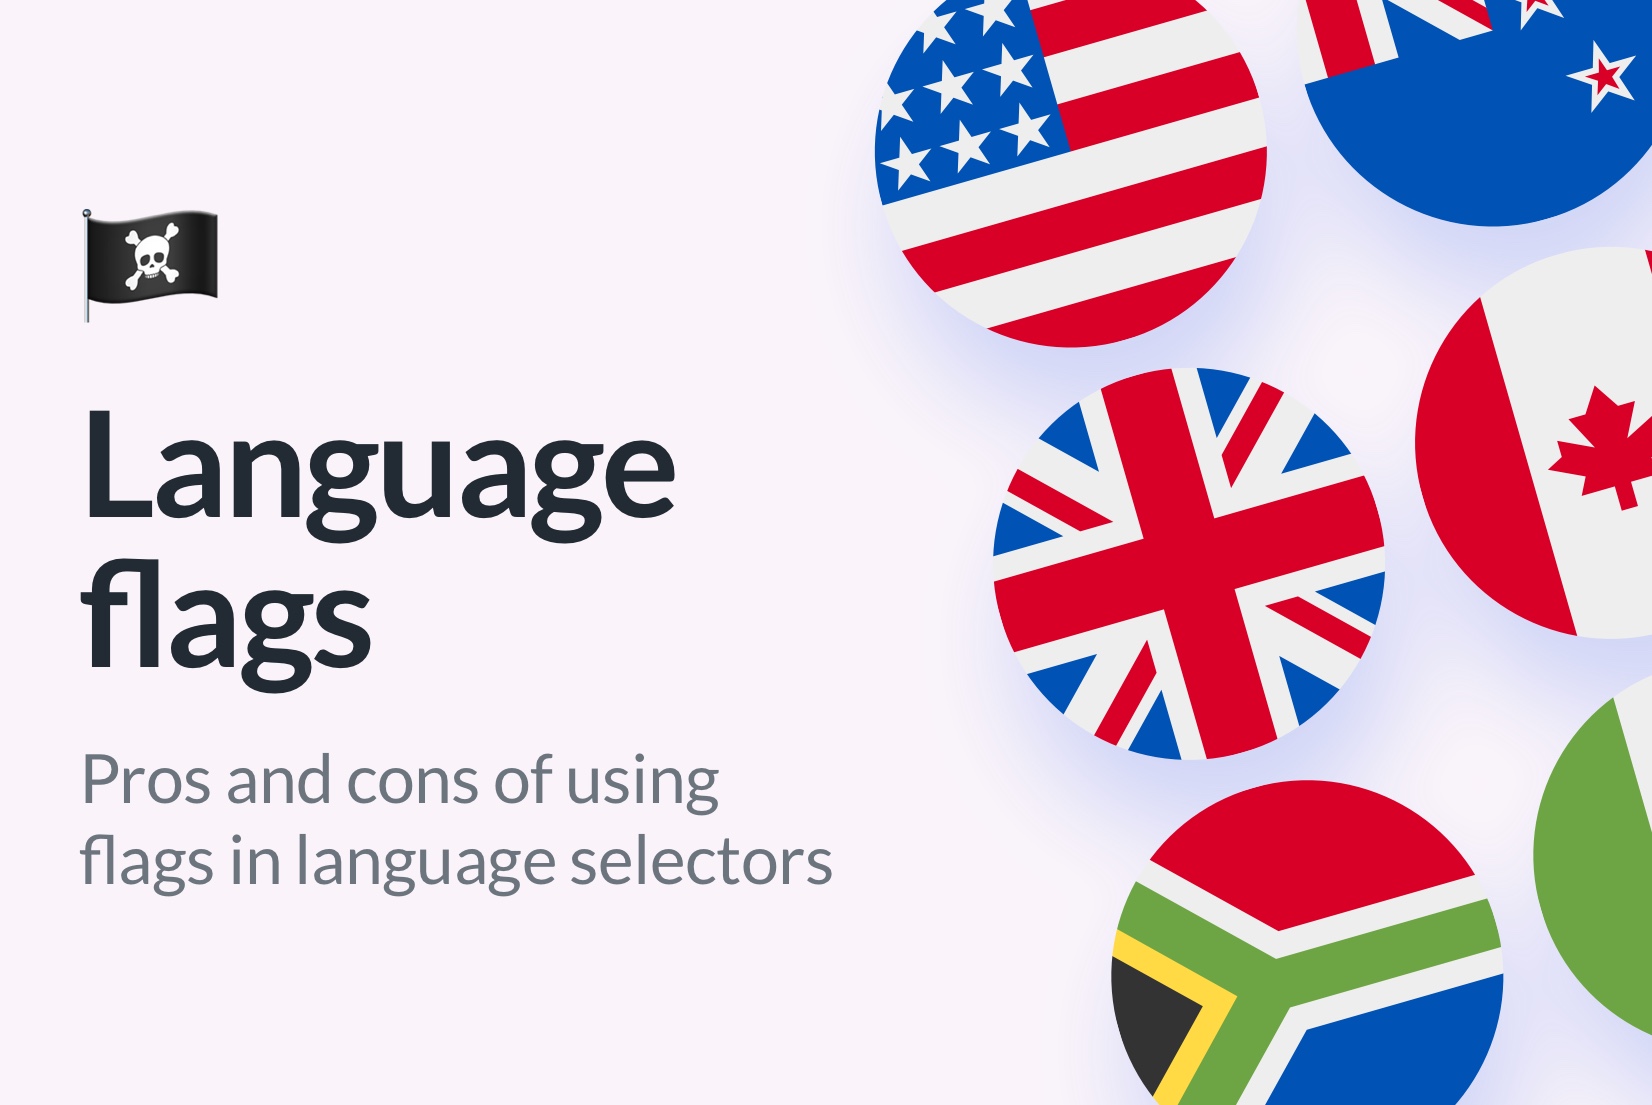 Flags in language selectors: should we keep or remove them?